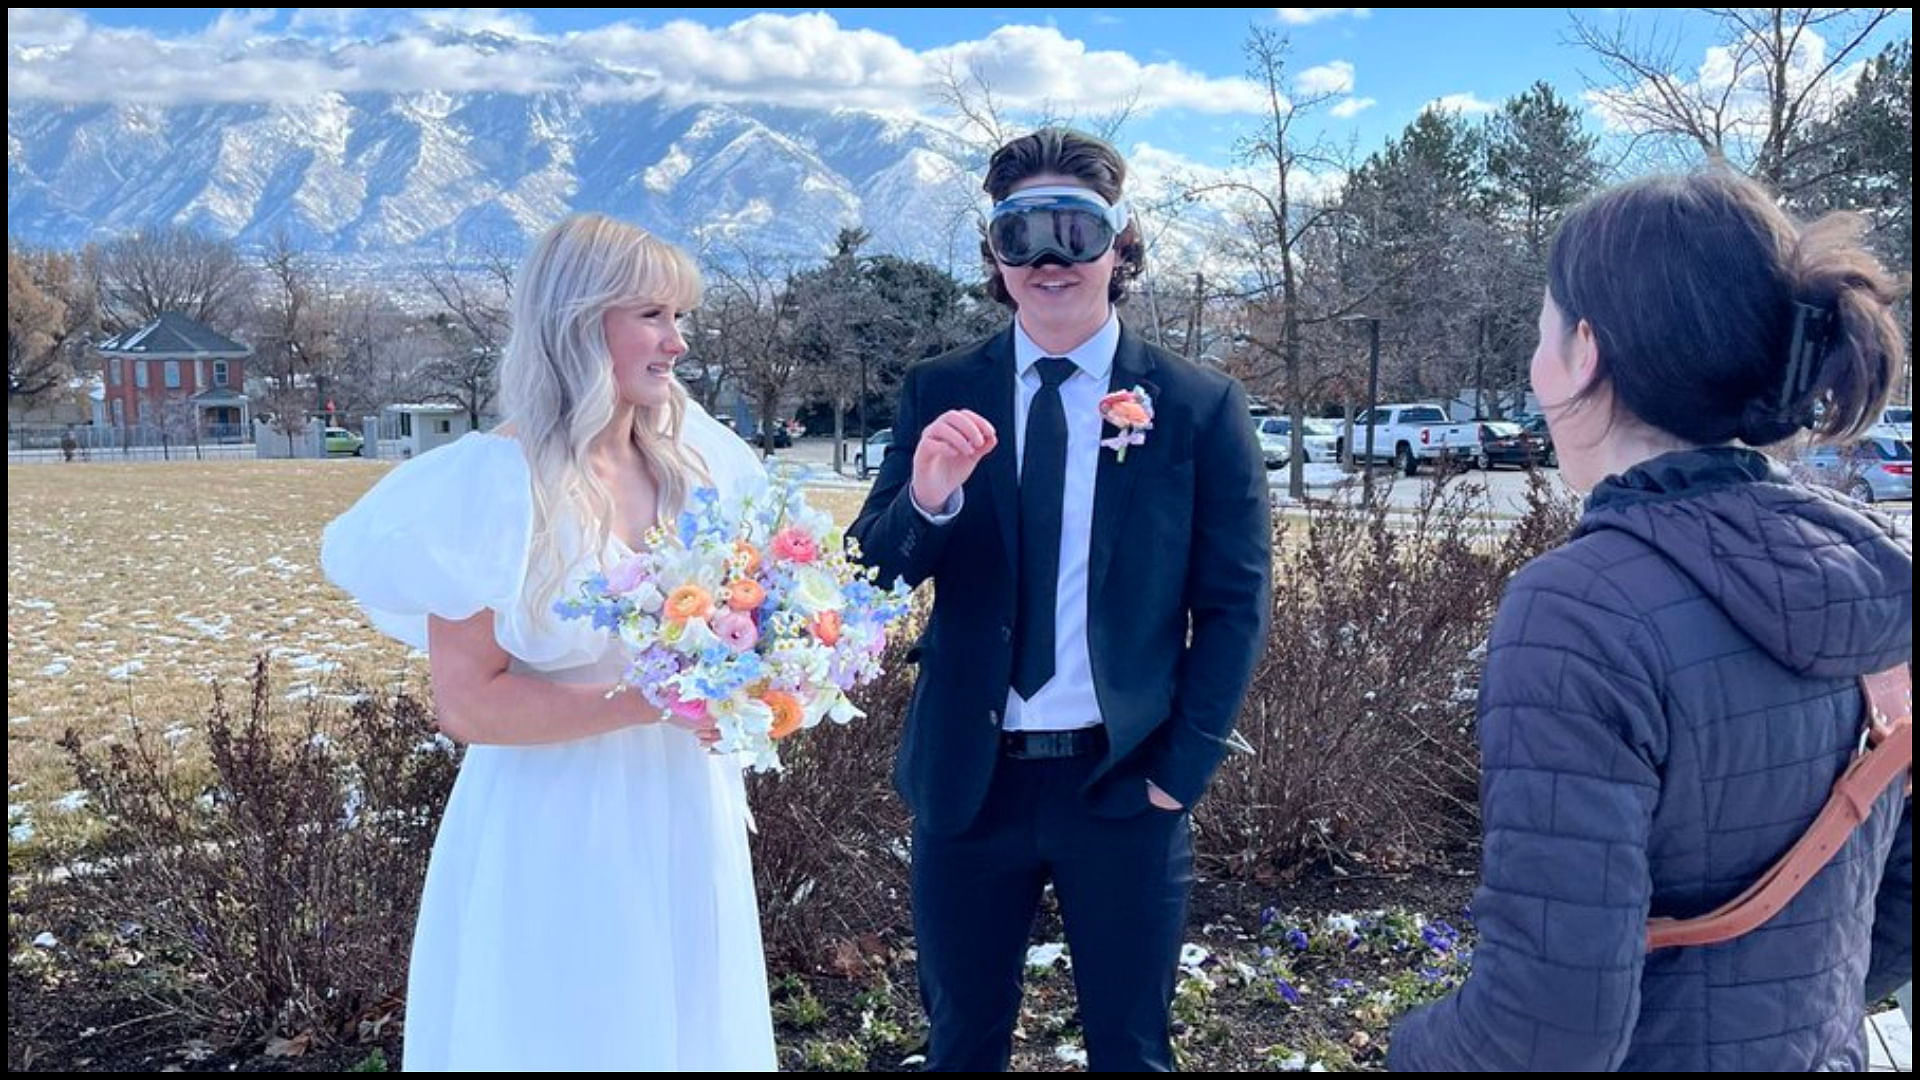 The groom wore apple vision pro instead of sehre during his wedding the bride kept watching